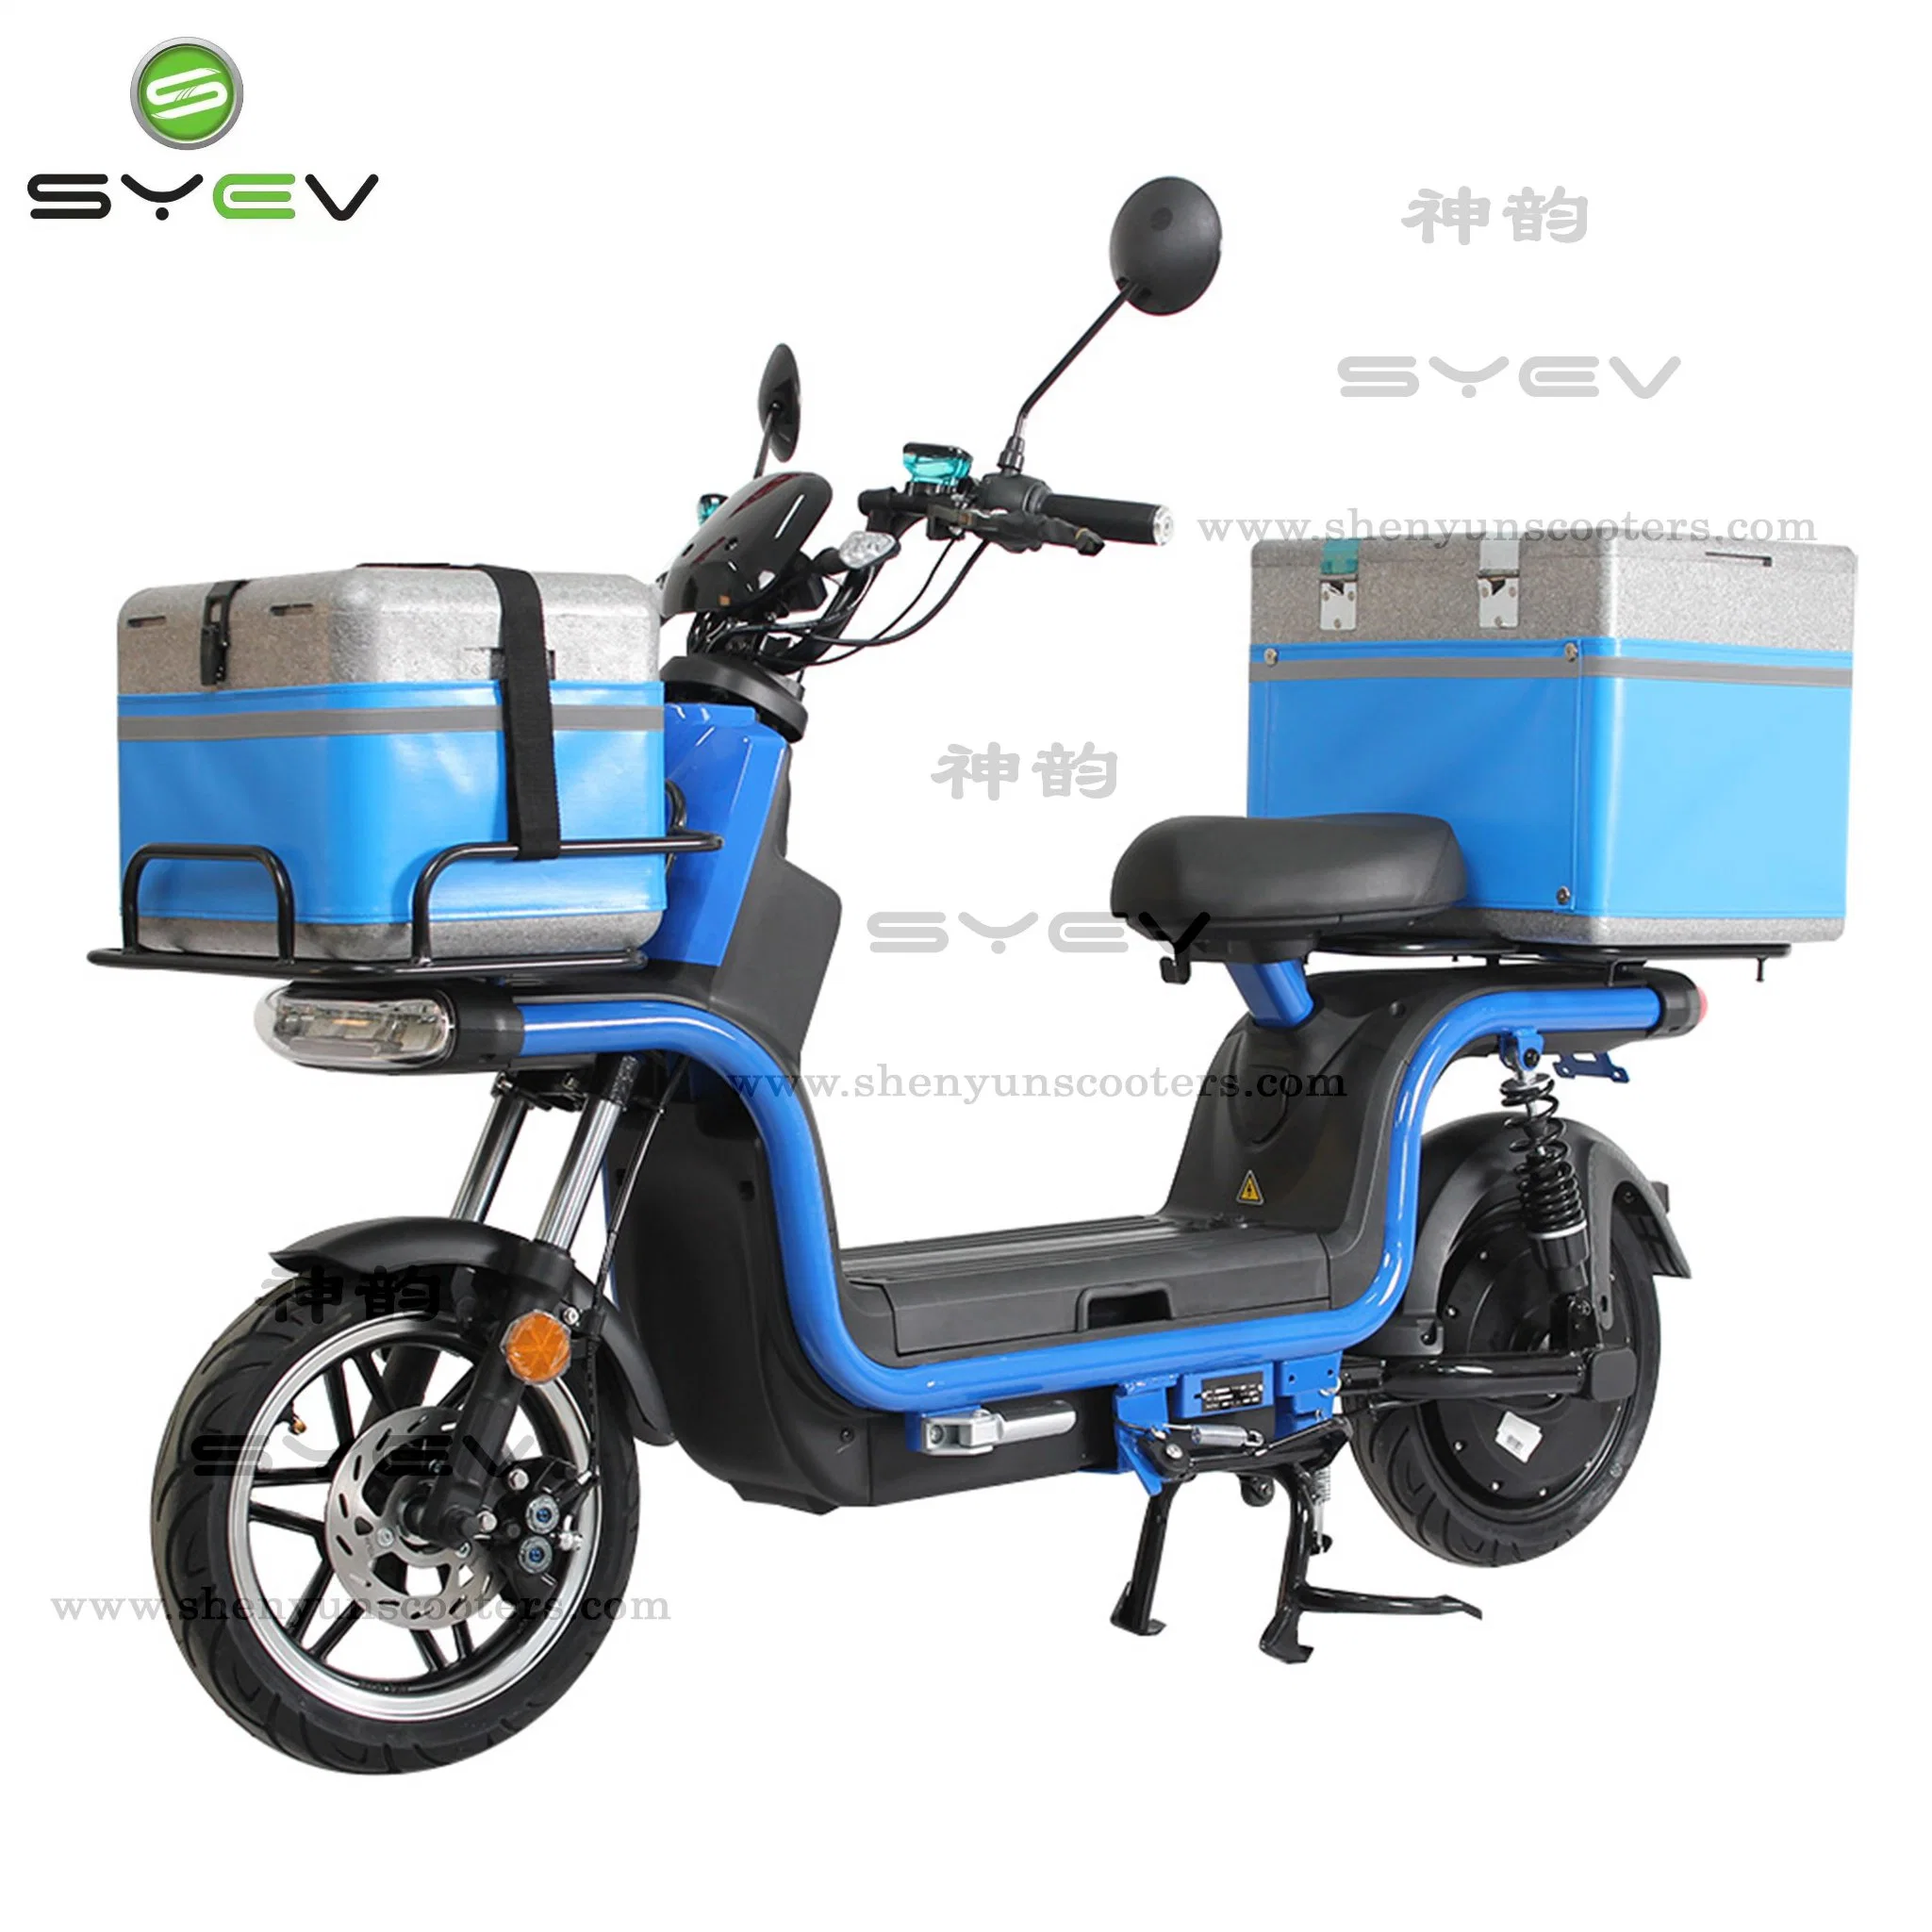 Syev Hot China Fast Food Delivery Scooter 1200W Powerful EEC Delivery E-Bike